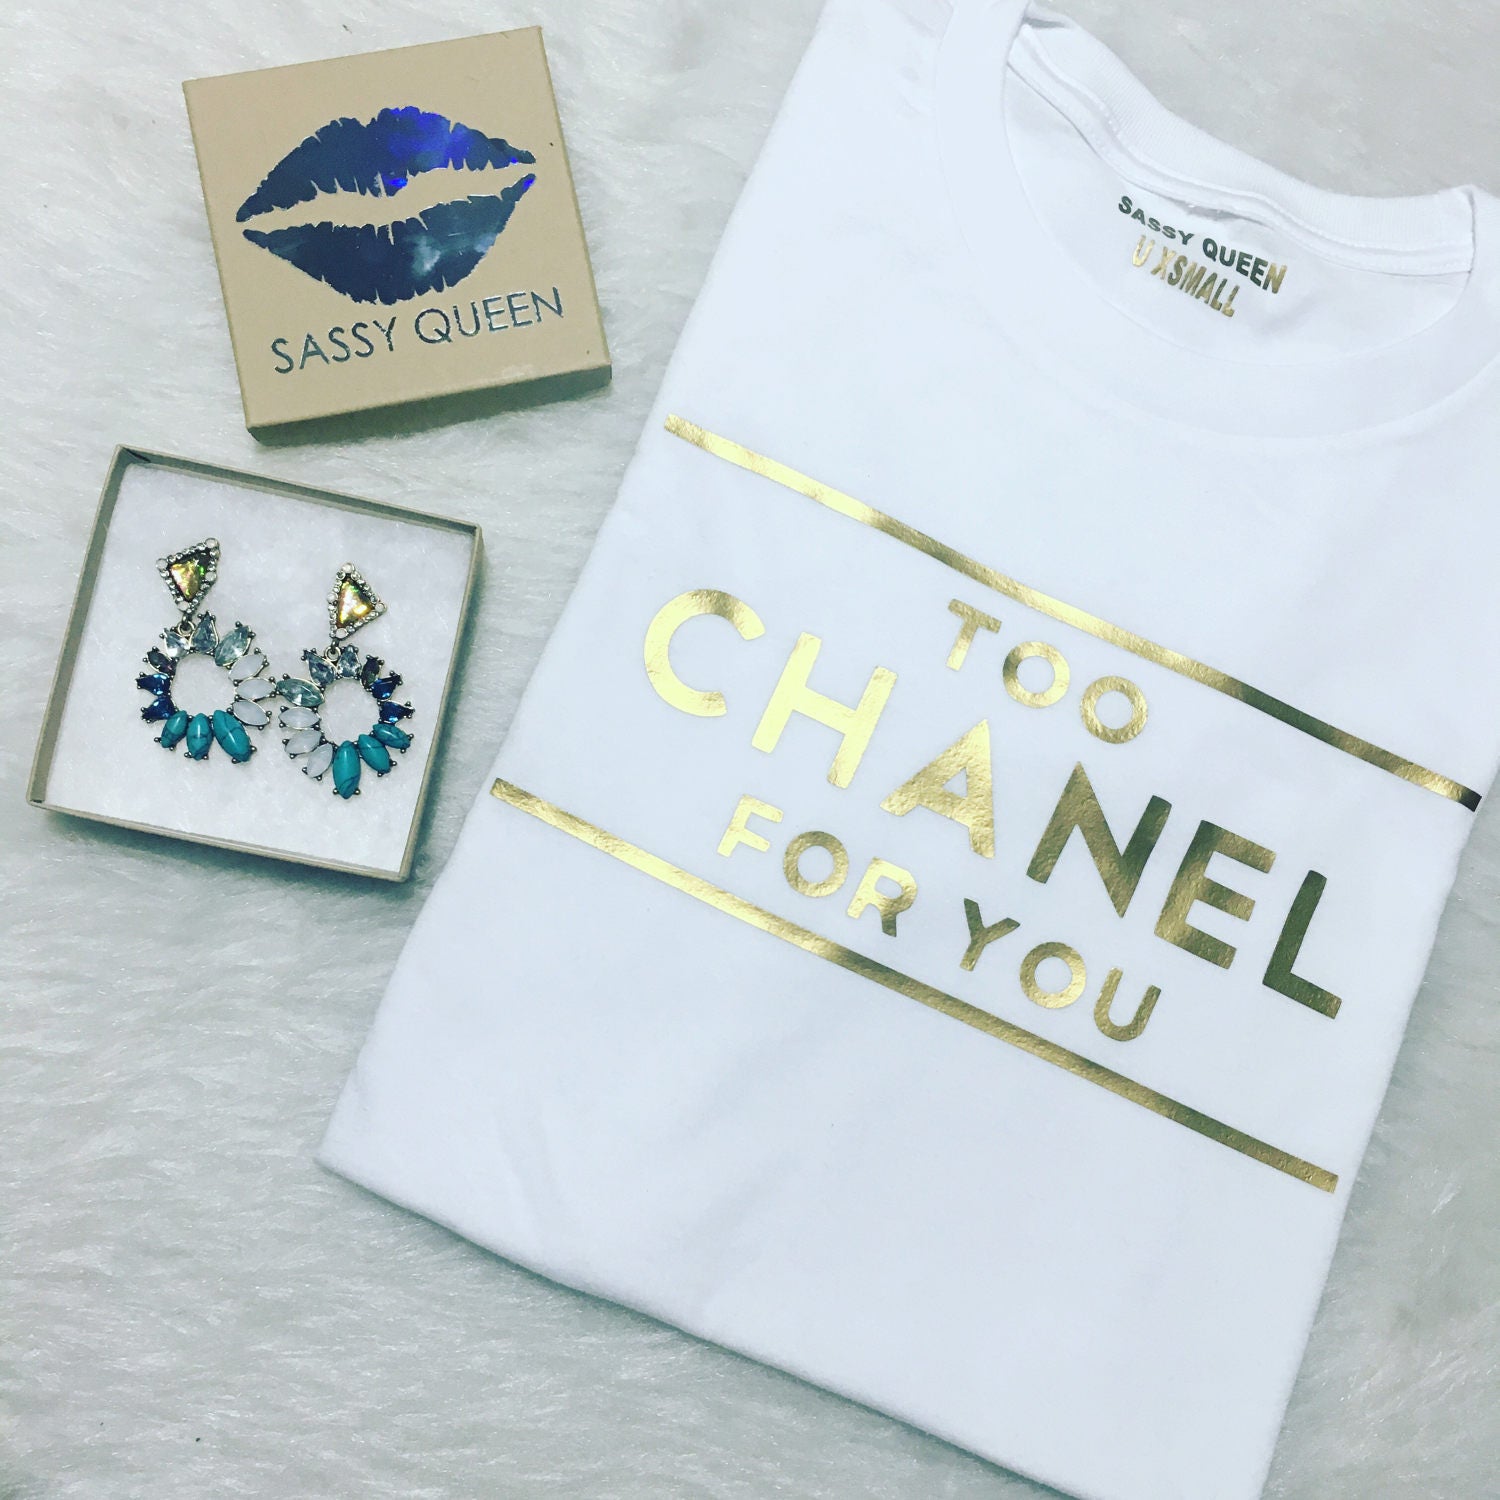 Too Chanel for You / Graphic Tee / Statement Tee / Graphic Tshirt / Statement Tshirt